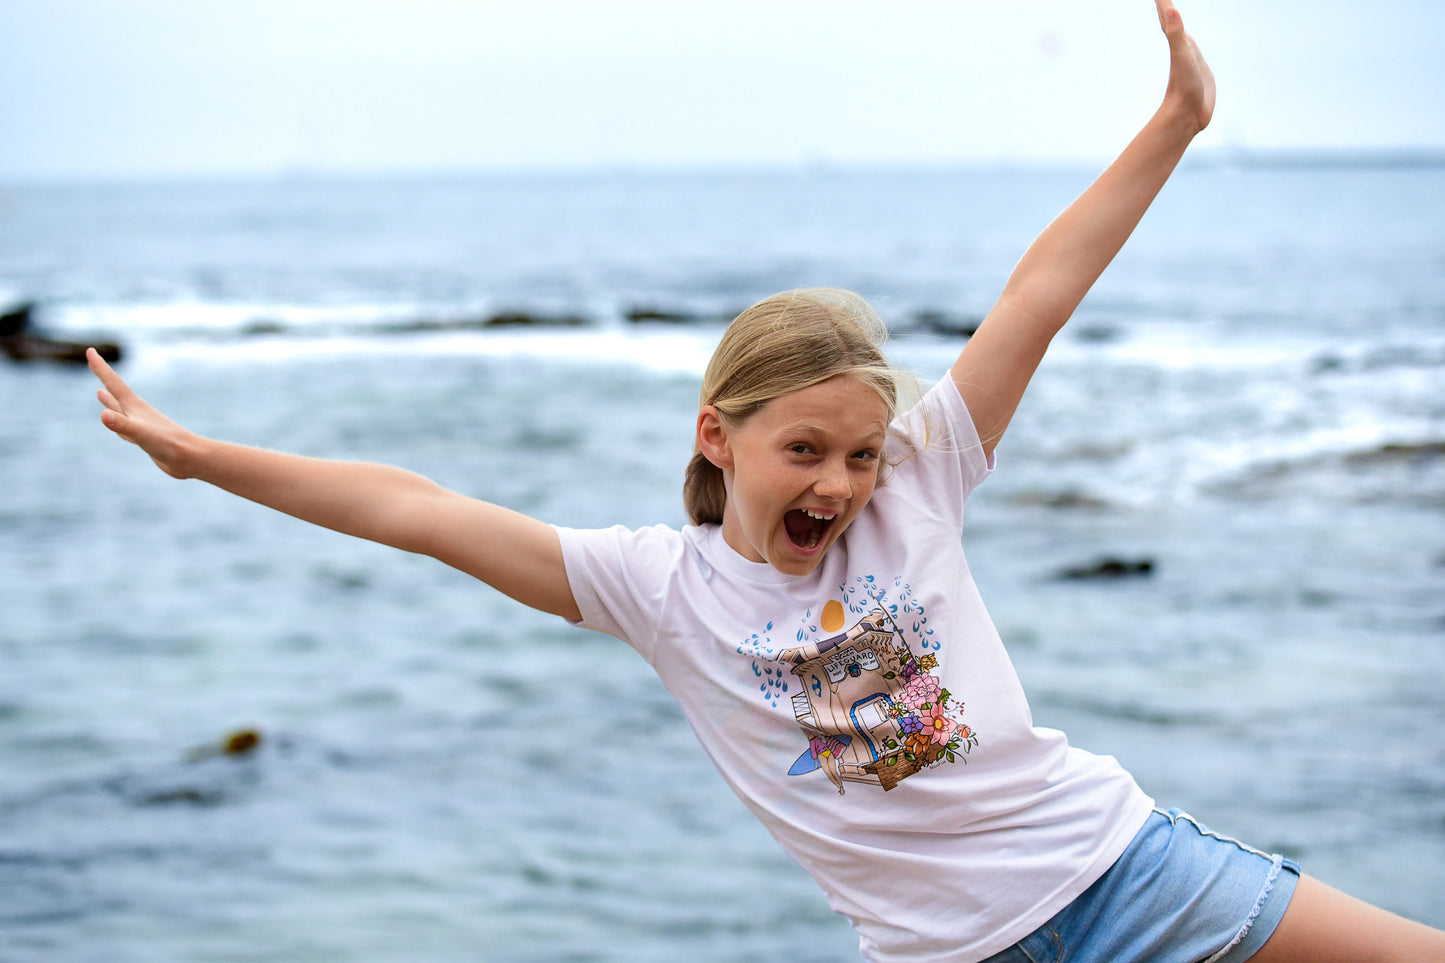 North Shore Kids handmade beach tees. Unisex sizes. Inspired by the beach, surf, travel, ocean life and art